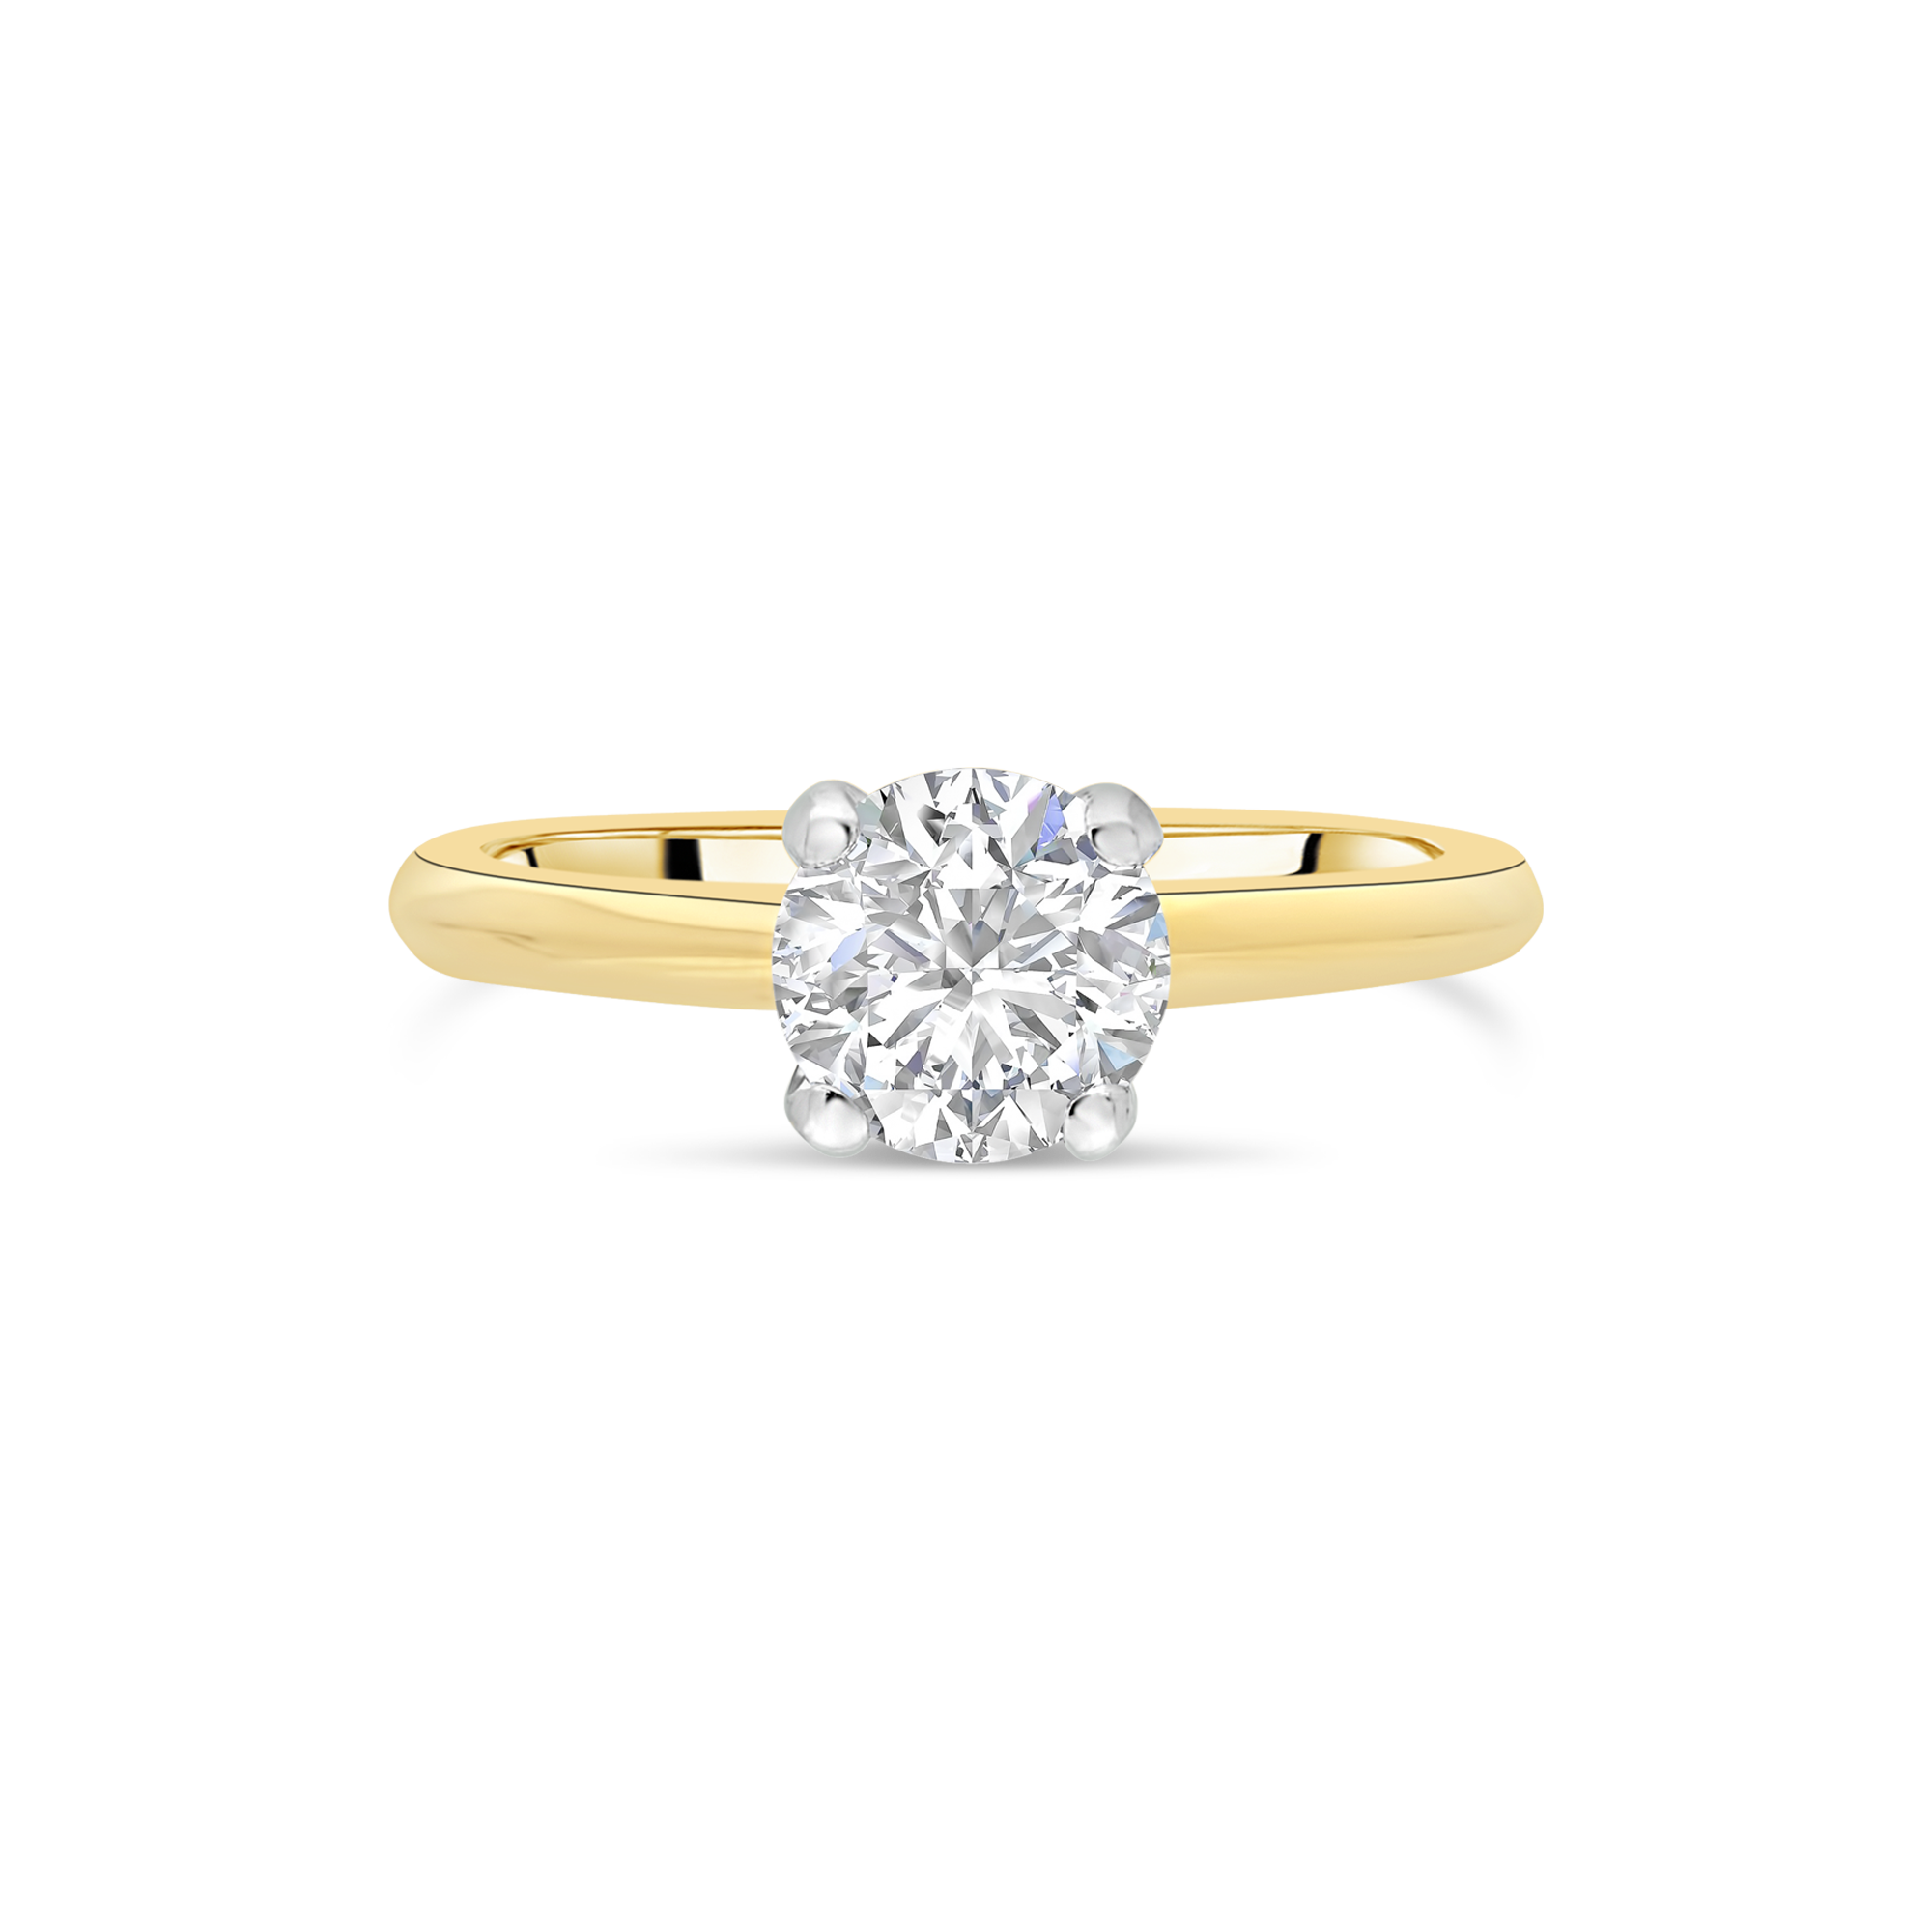 The "Courtship" Solitaire Yellow Gold